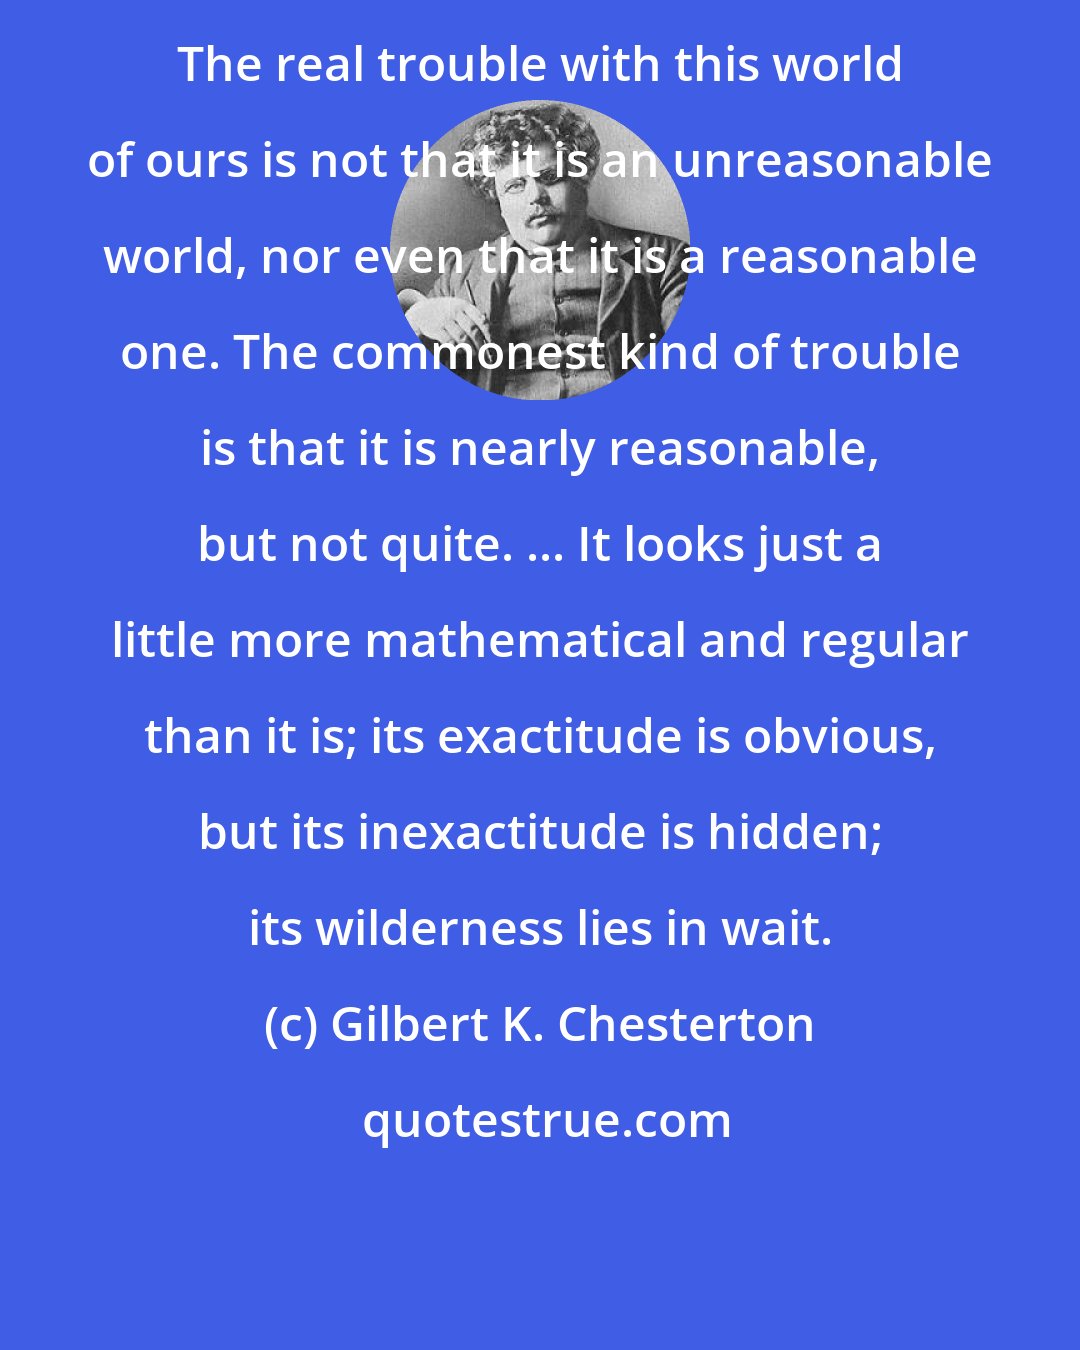 Gilbert K. Chesterton: The real trouble with this world of ours is not that it is an unreasonable world, nor even that it is a reasonable one. The commonest kind of trouble is that it is nearly reasonable, but not quite. ... It looks just a little more mathematical and regular than it is; its exactitude is obvious, but its inexactitude is hidden; its wilderness lies in wait.